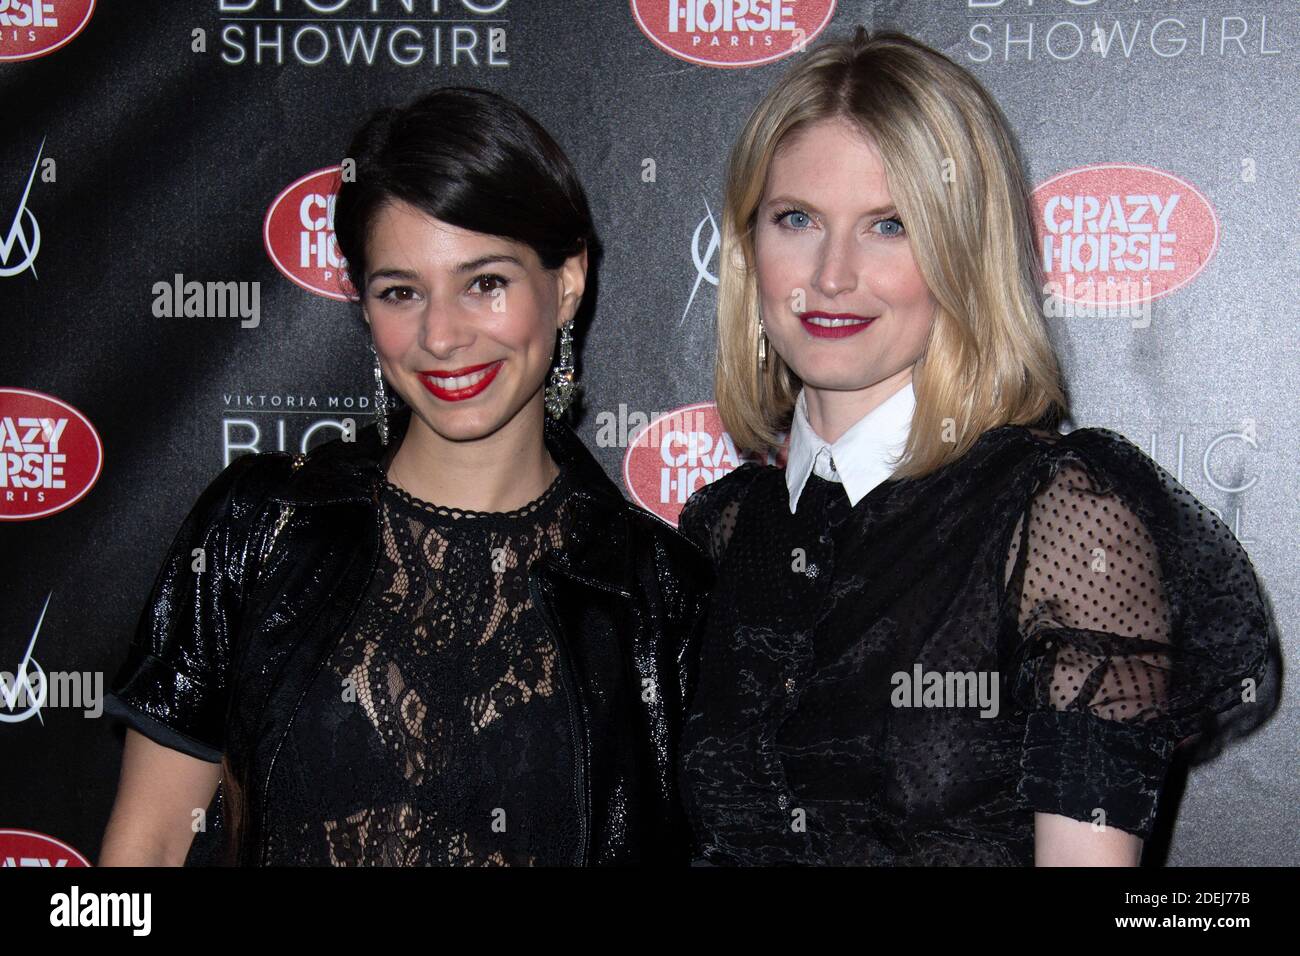 Marie Facundo and Juliette Faucon from the band Les Coquettes attending the Bionic ShowGirl Premiere at the Crazy Horse in Paris, France on June 03, 2019. Photo by Aurore Marechal/ABACAPRESS.COM Stock Photo